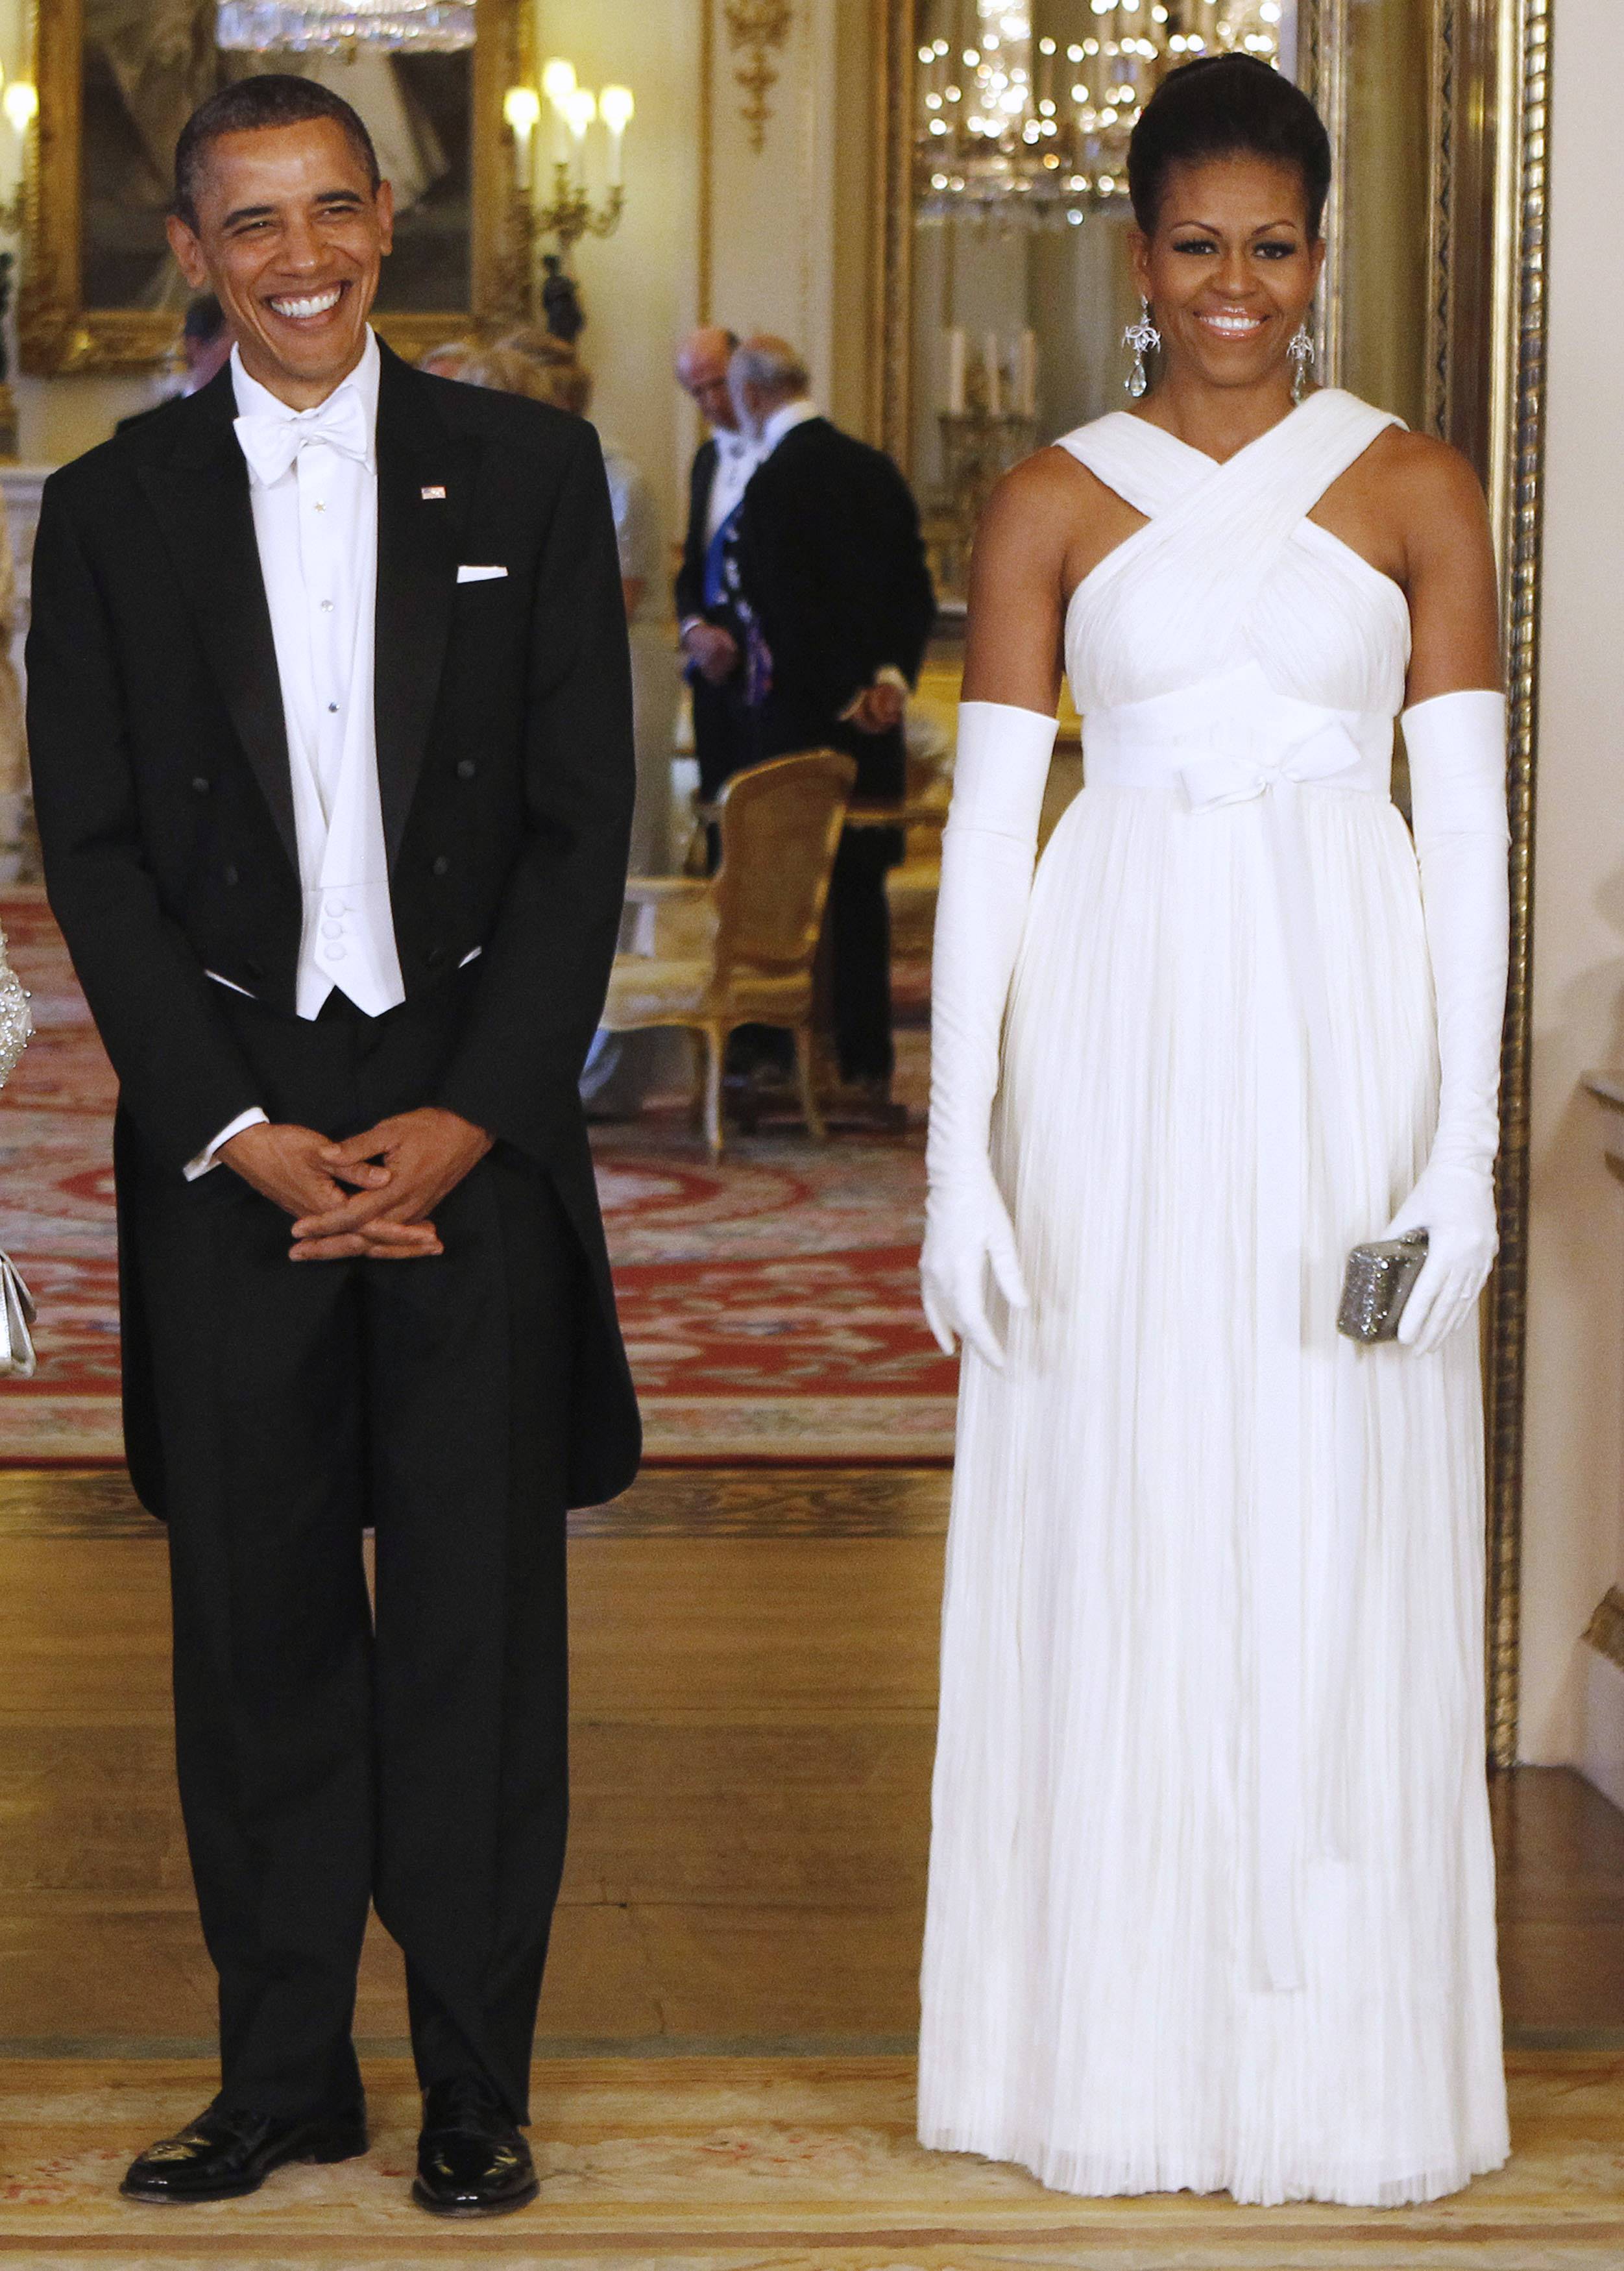 Banquet - The Queen - Image 26 from Photos: Obamas in Europe | BET